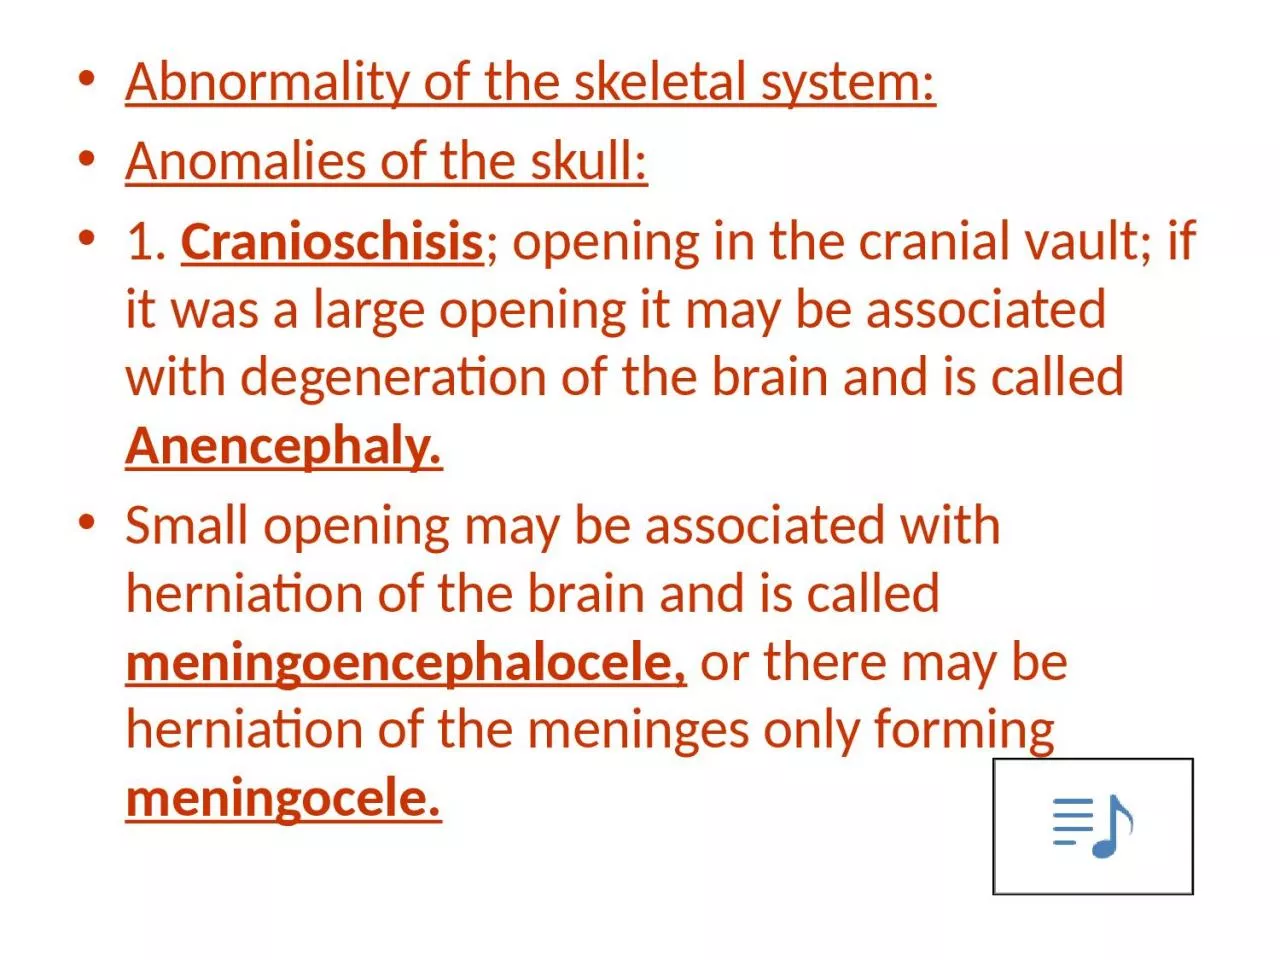 Abnormality of the skeletal system: